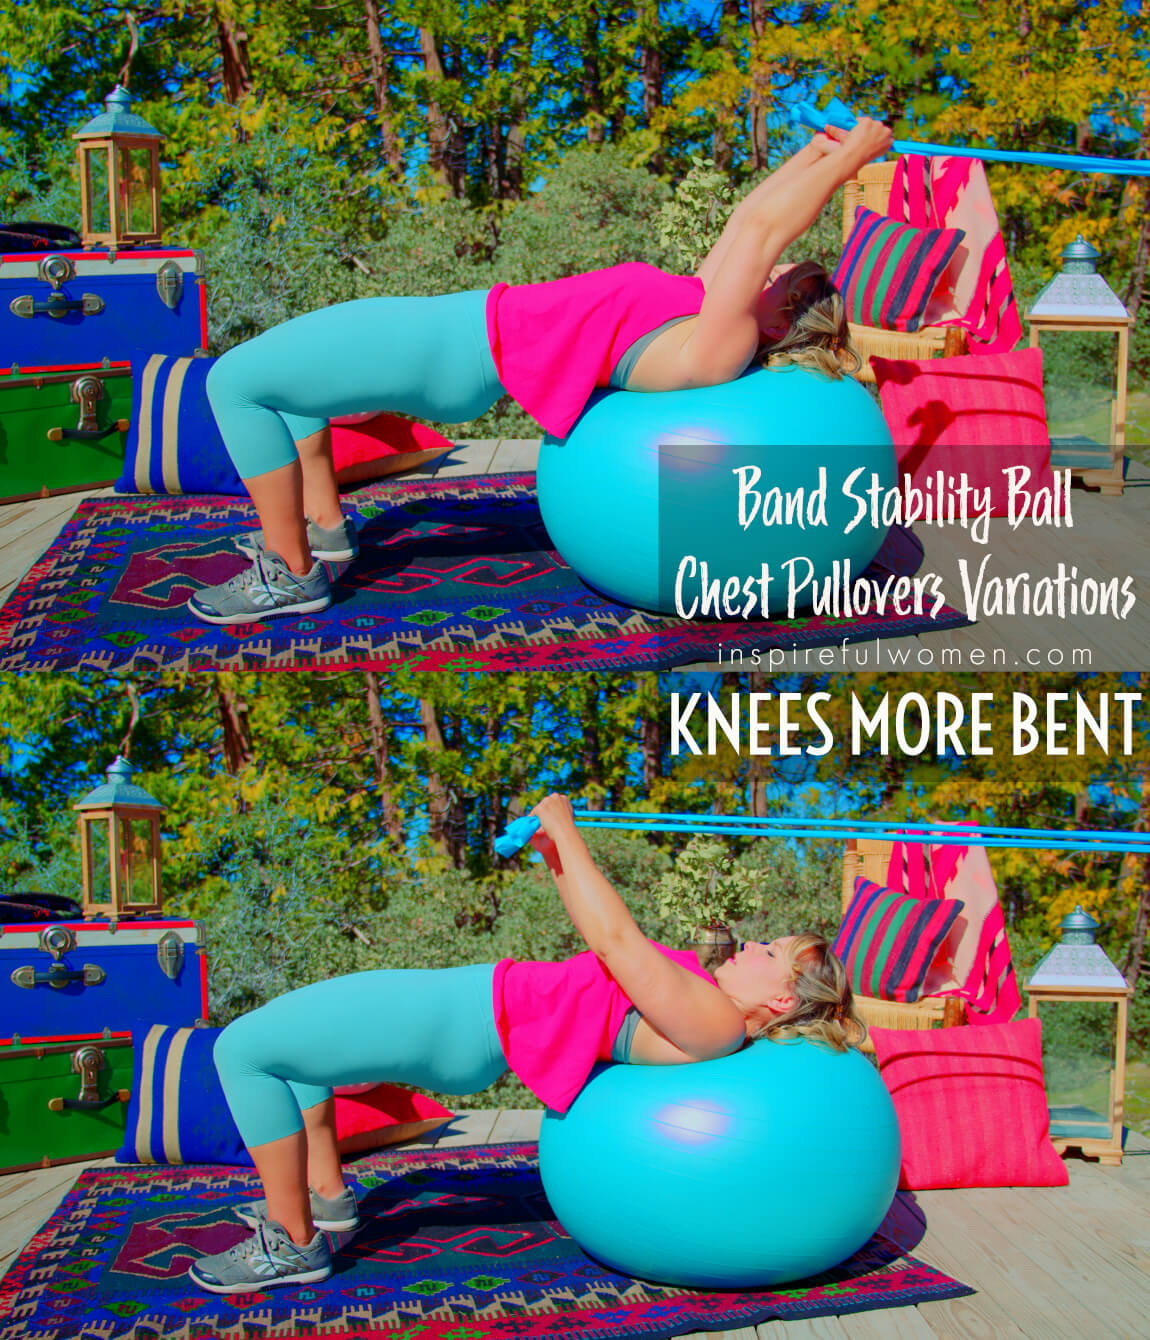 knees-more-bent-stability-ball-band-chest-pullover-variations